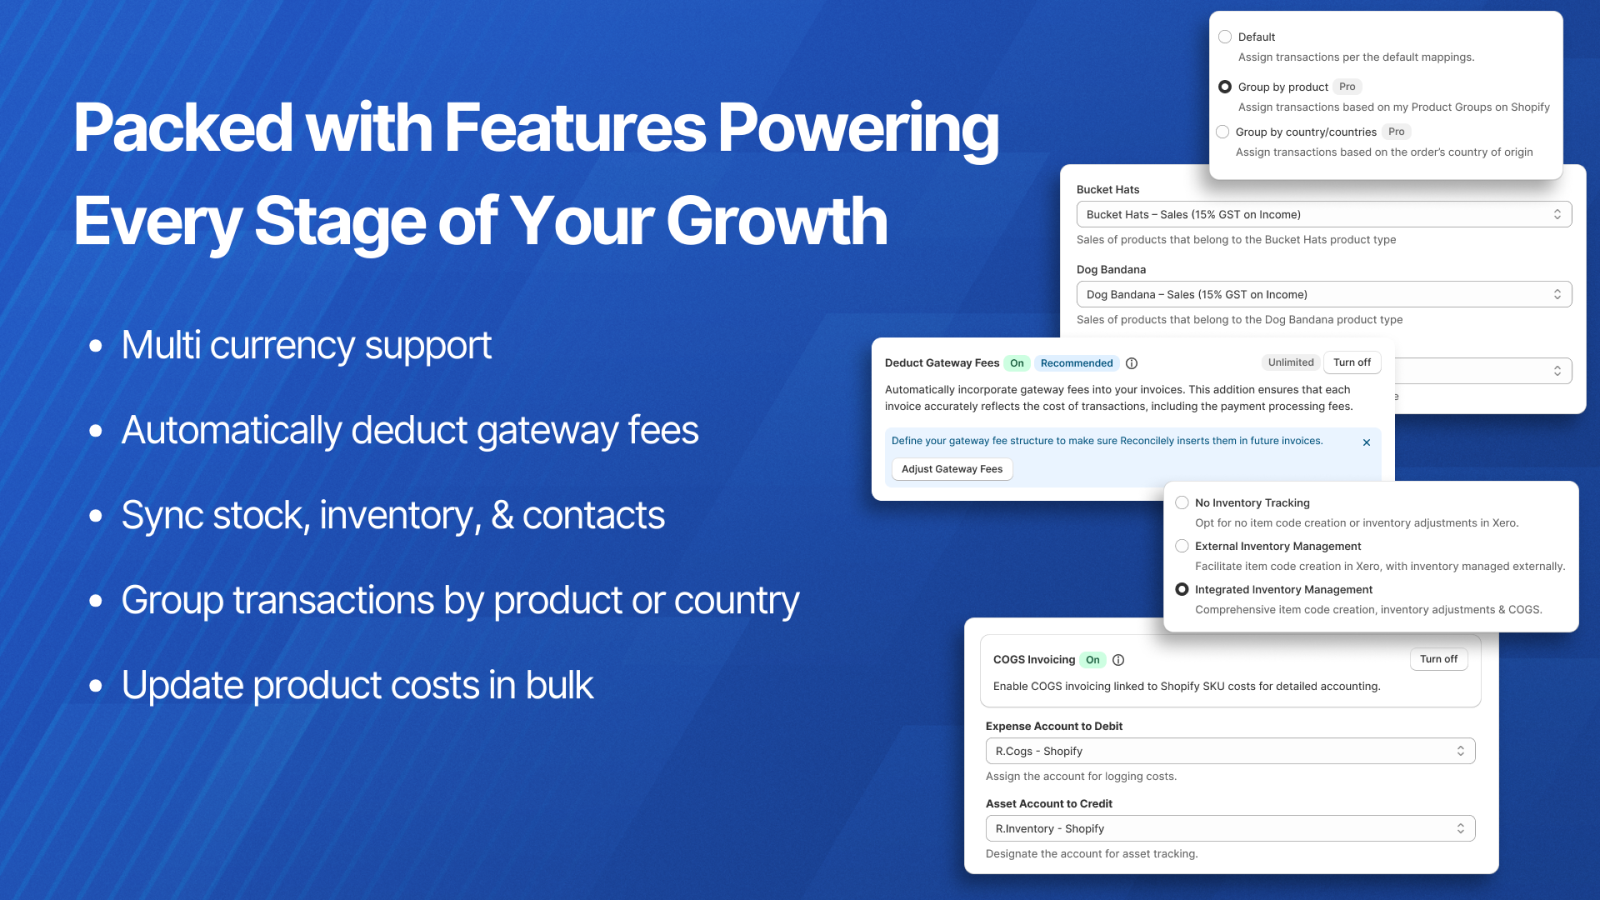 Packed with features powering every stage of your growth